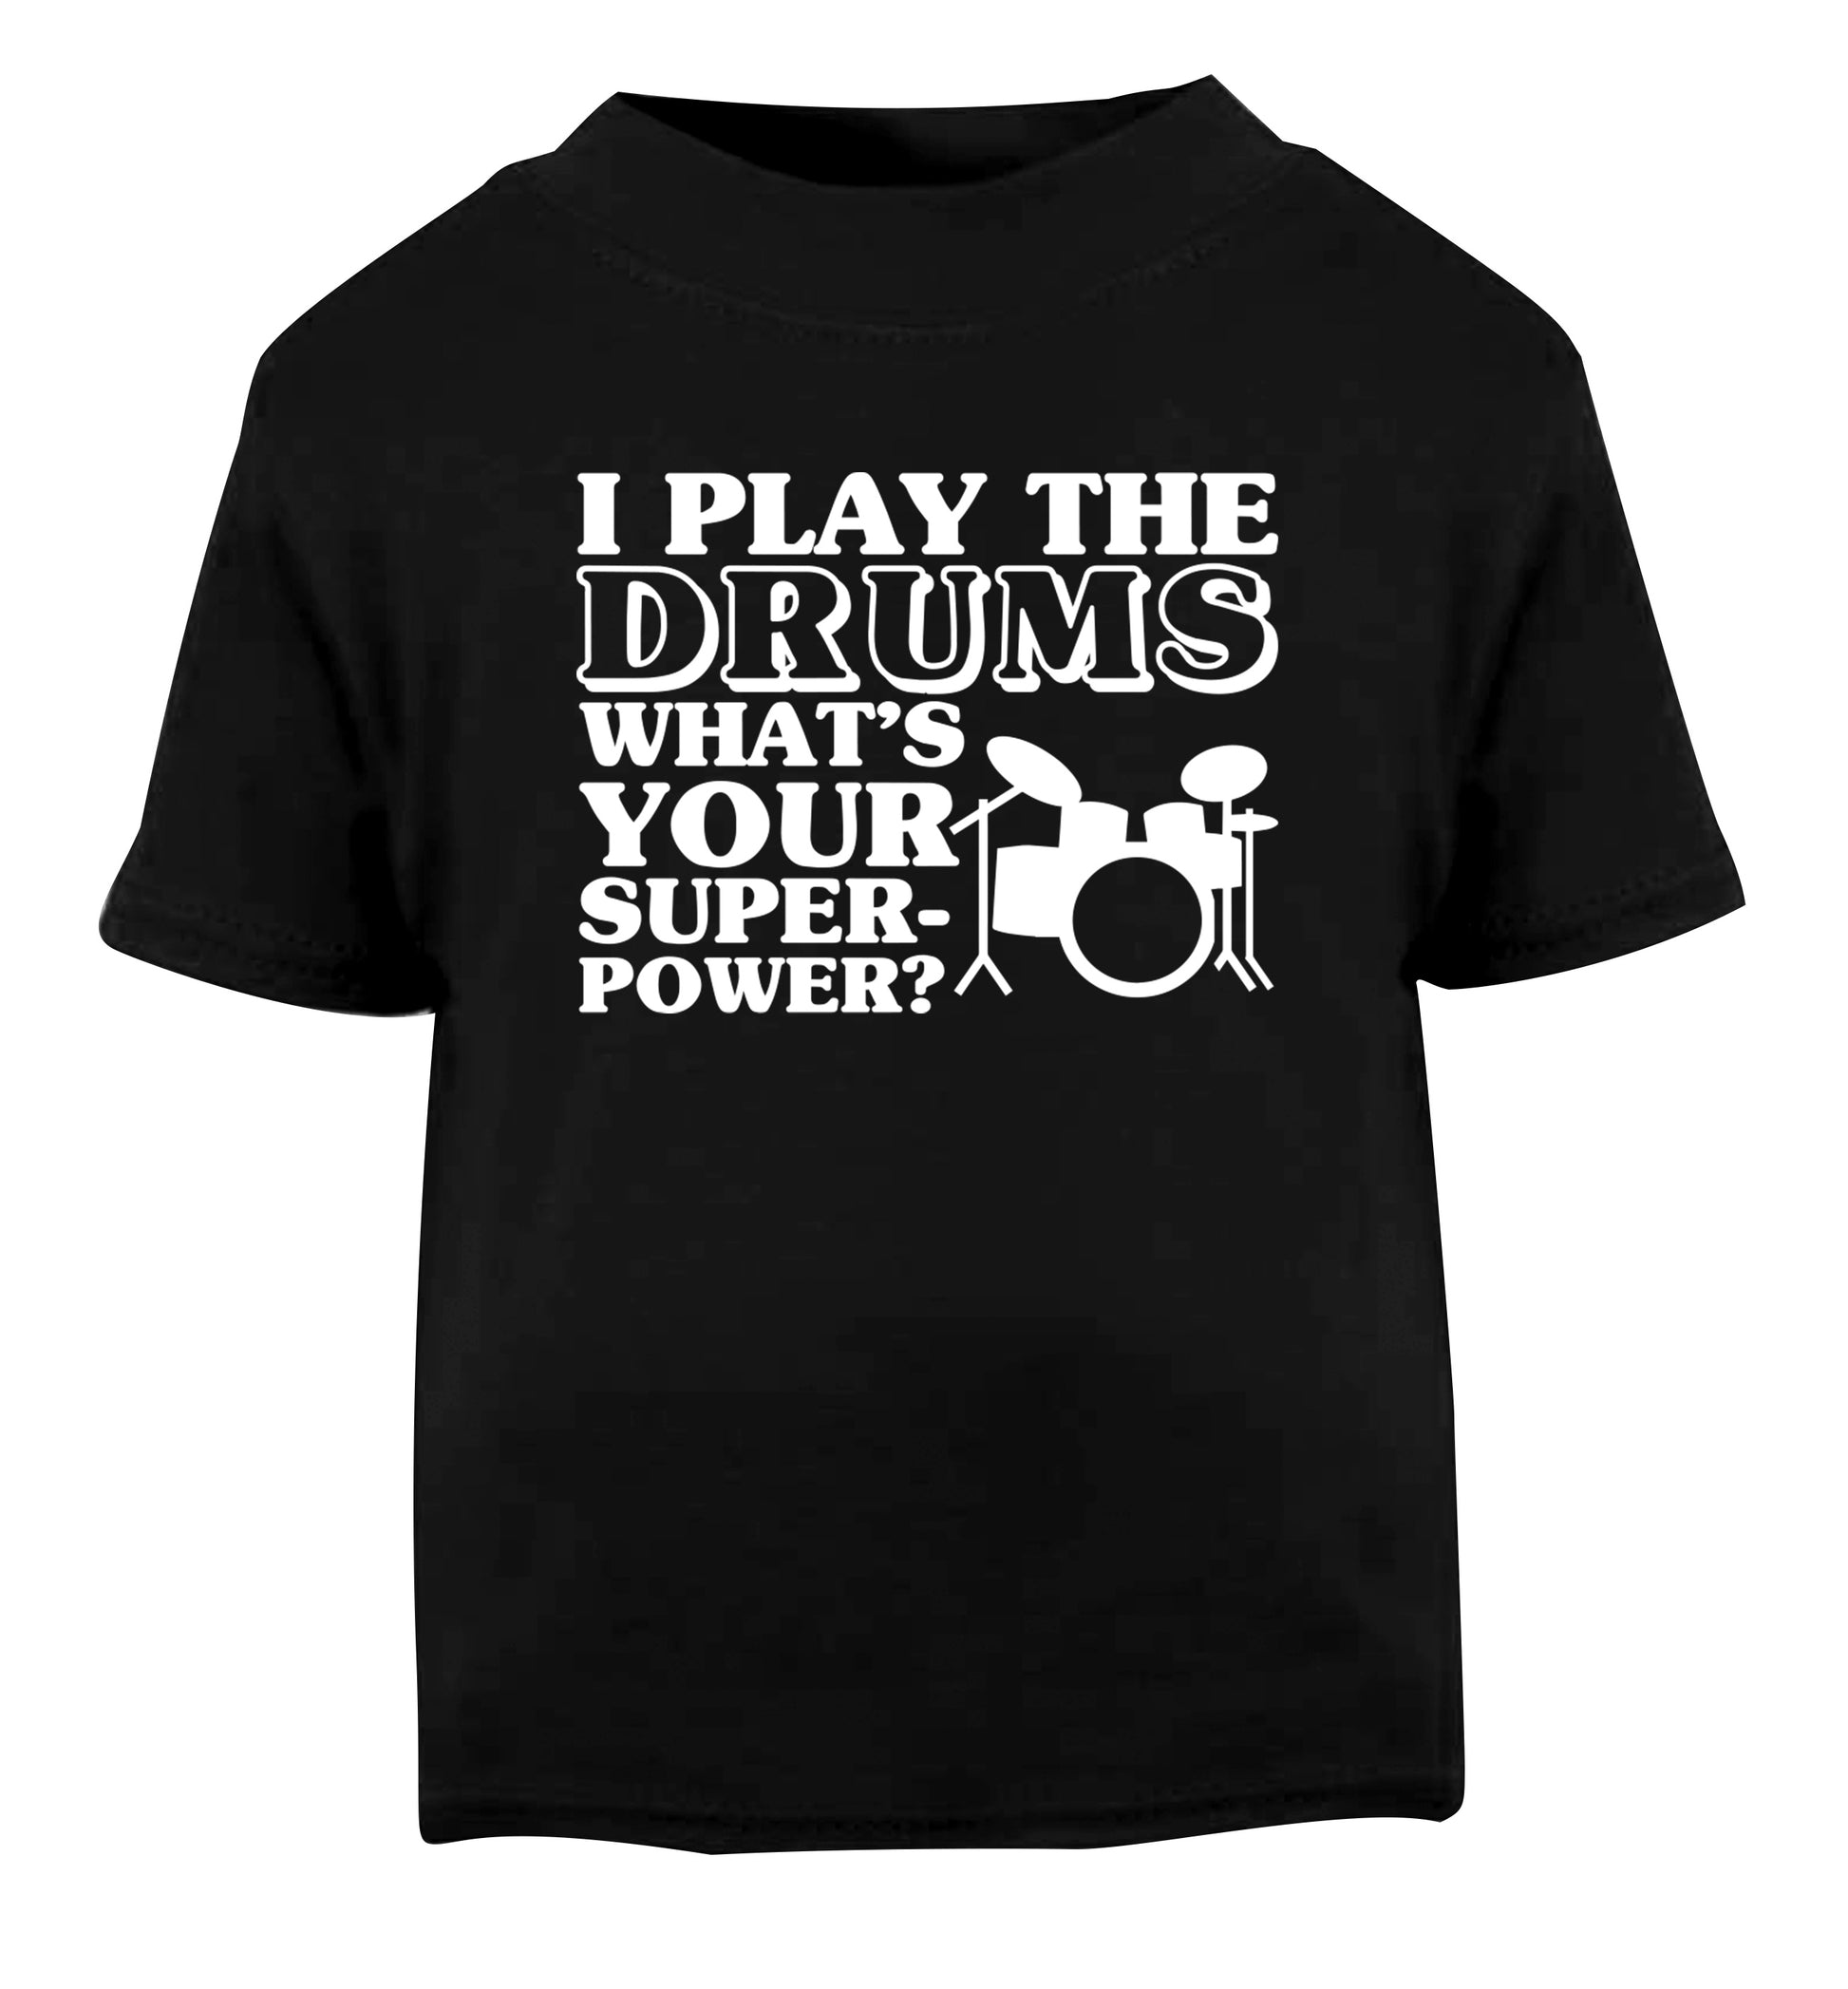 I play the drums what's your superpower? Black Baby Toddler Tshirt 2 years